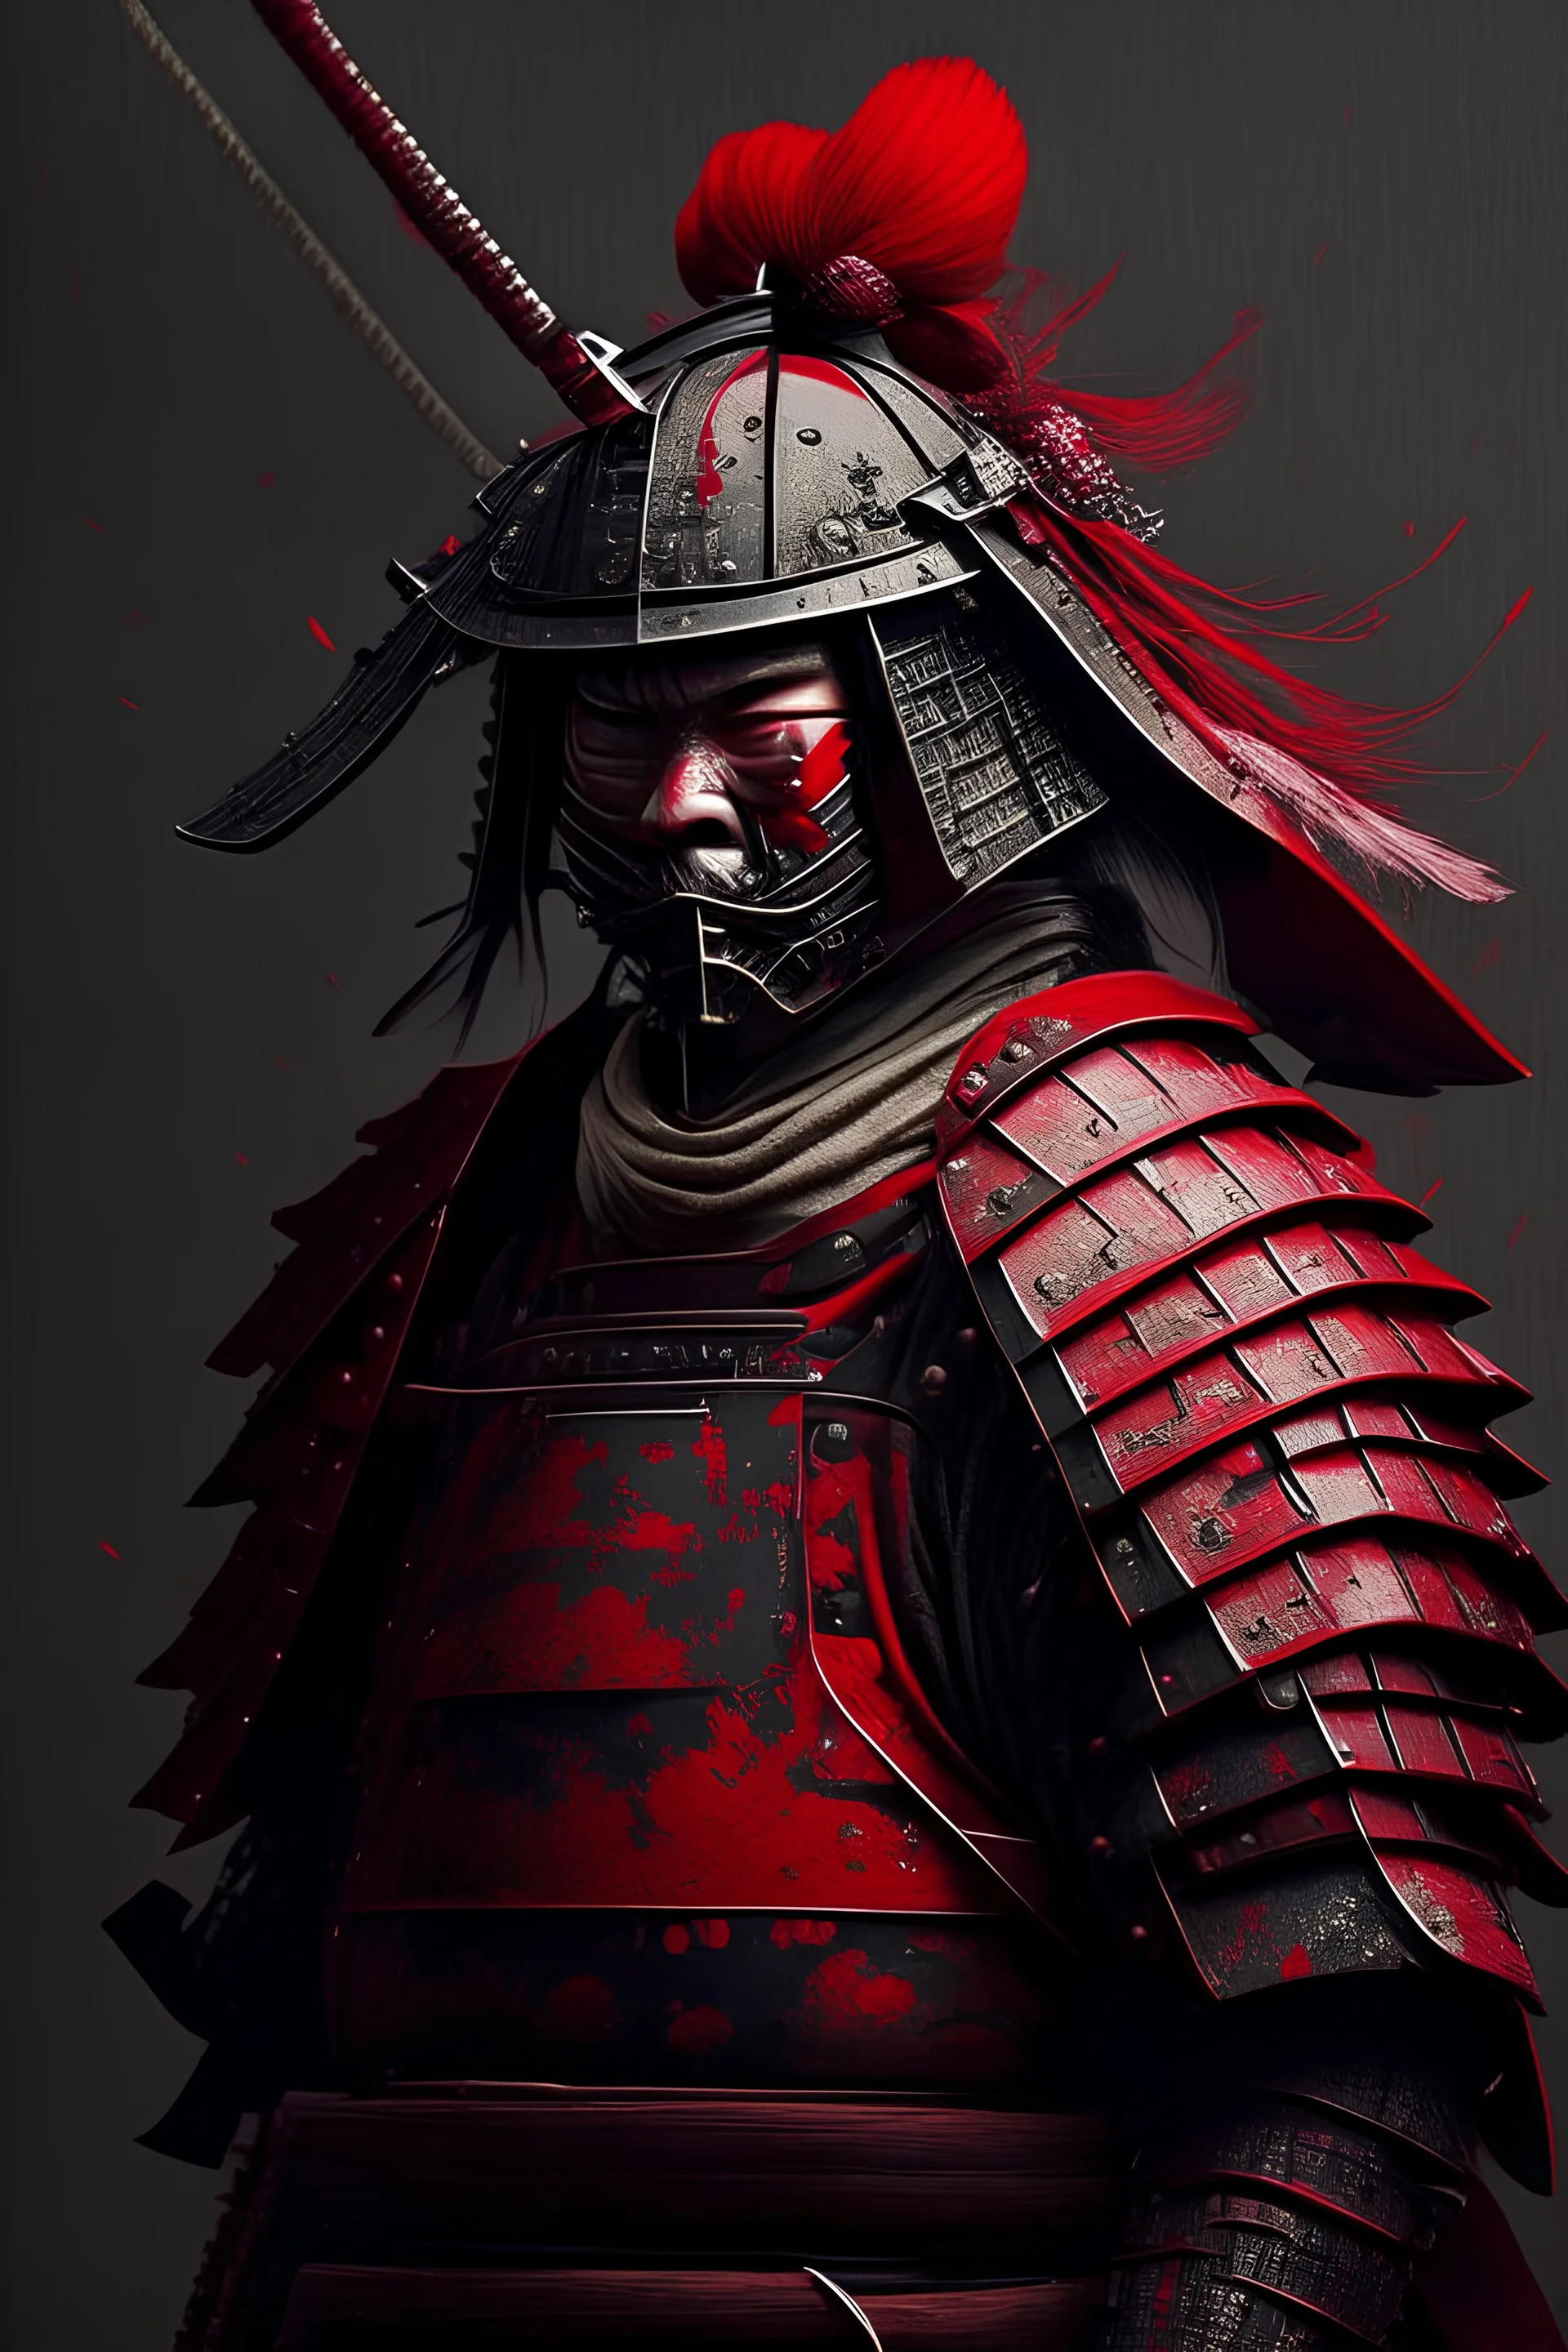 A samurai in armor without a helmet, with Red